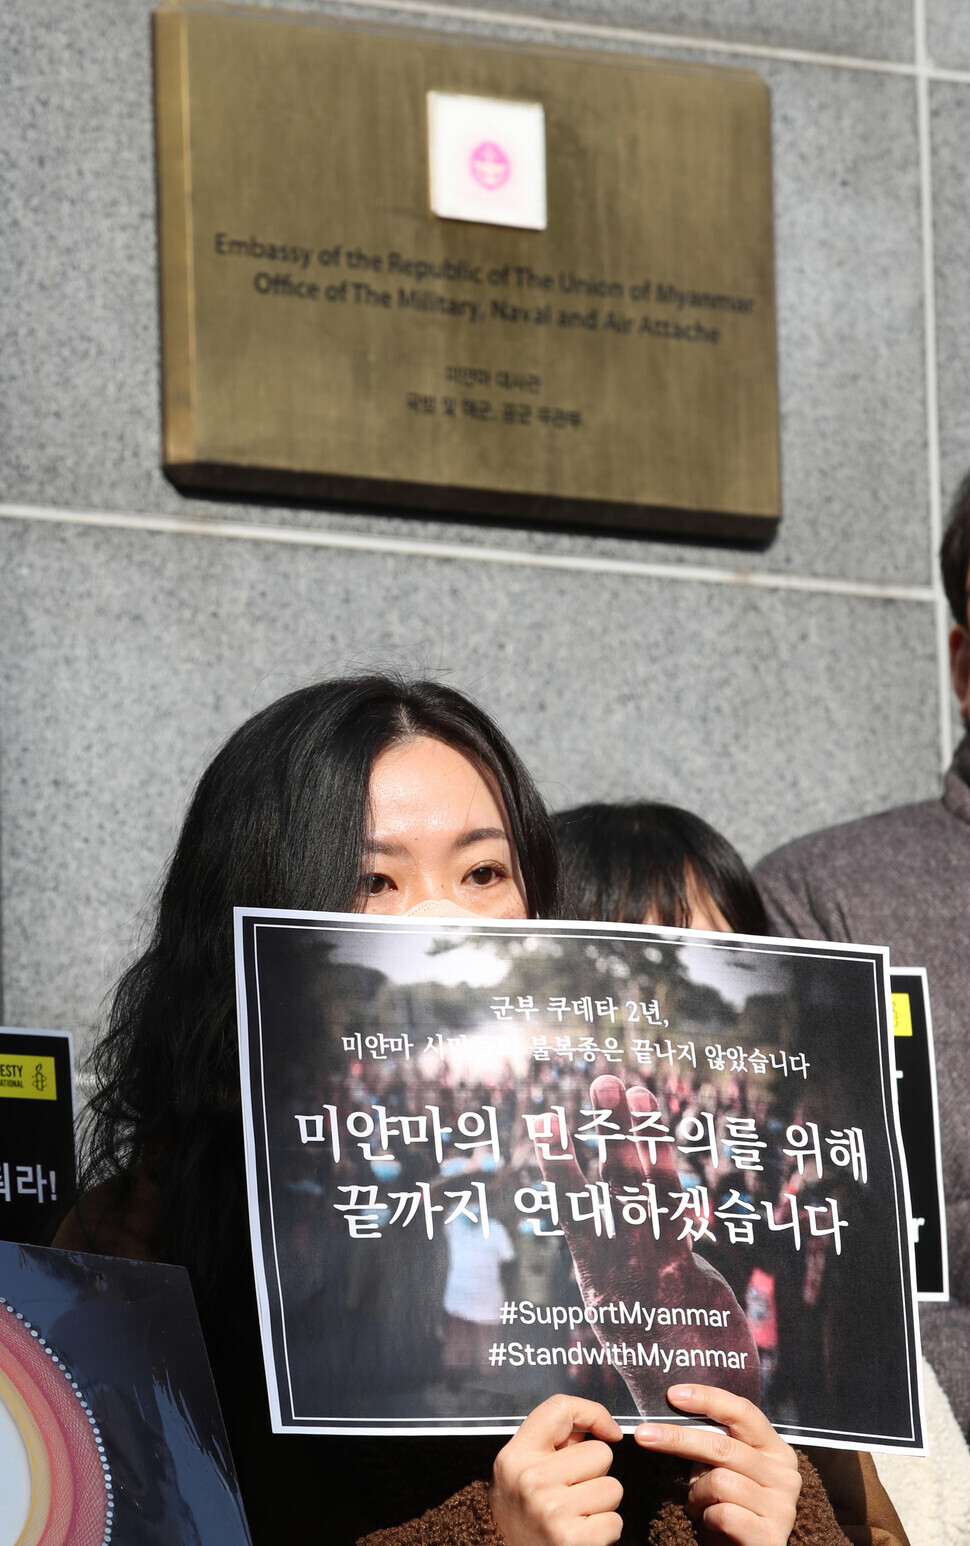 A supporter of democracy in Myanmar holds a sign outside the Myanmar Embassy in Seoul on Feb. 1 to condemn the two-year rule of the military junta following a coup and to call for democracy in Myanmar. (Shin So-young/The Hankyoreh)